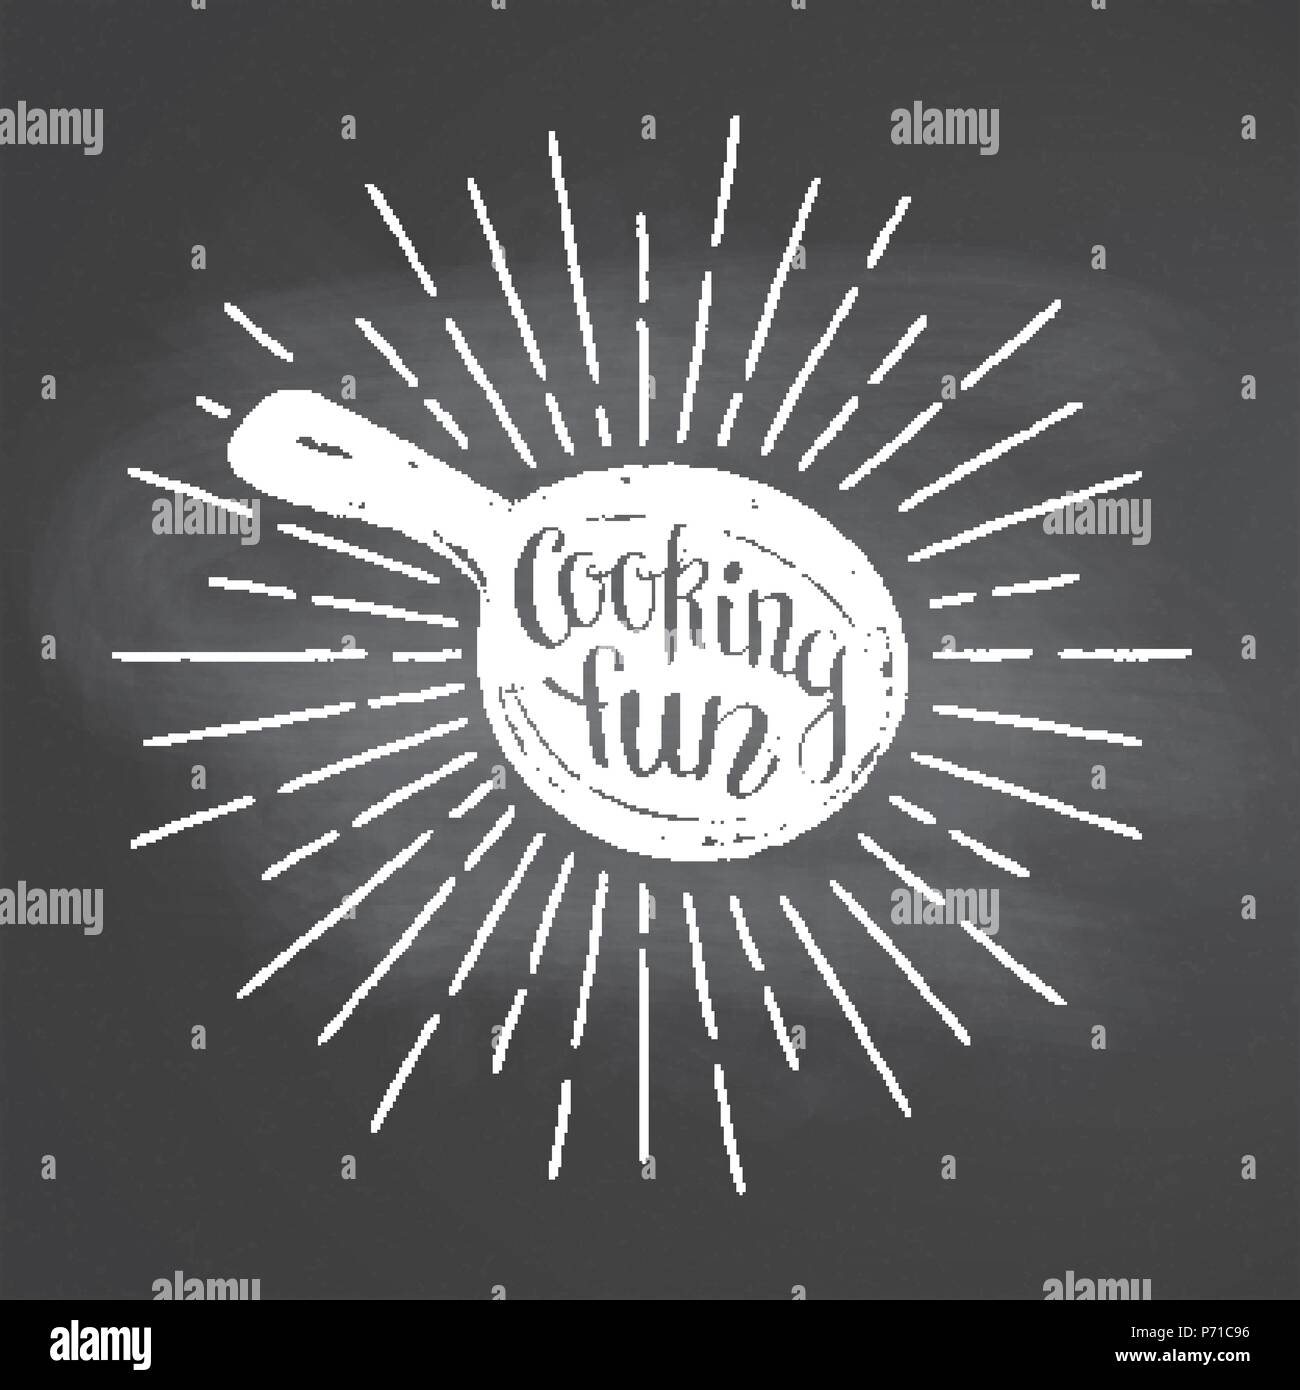 Chalk silhoutte of a pan with sun rays and lettering - Cooking fun - on blackboard. Good for cooking logotypes, bades, menu design or posters. Stock Vector